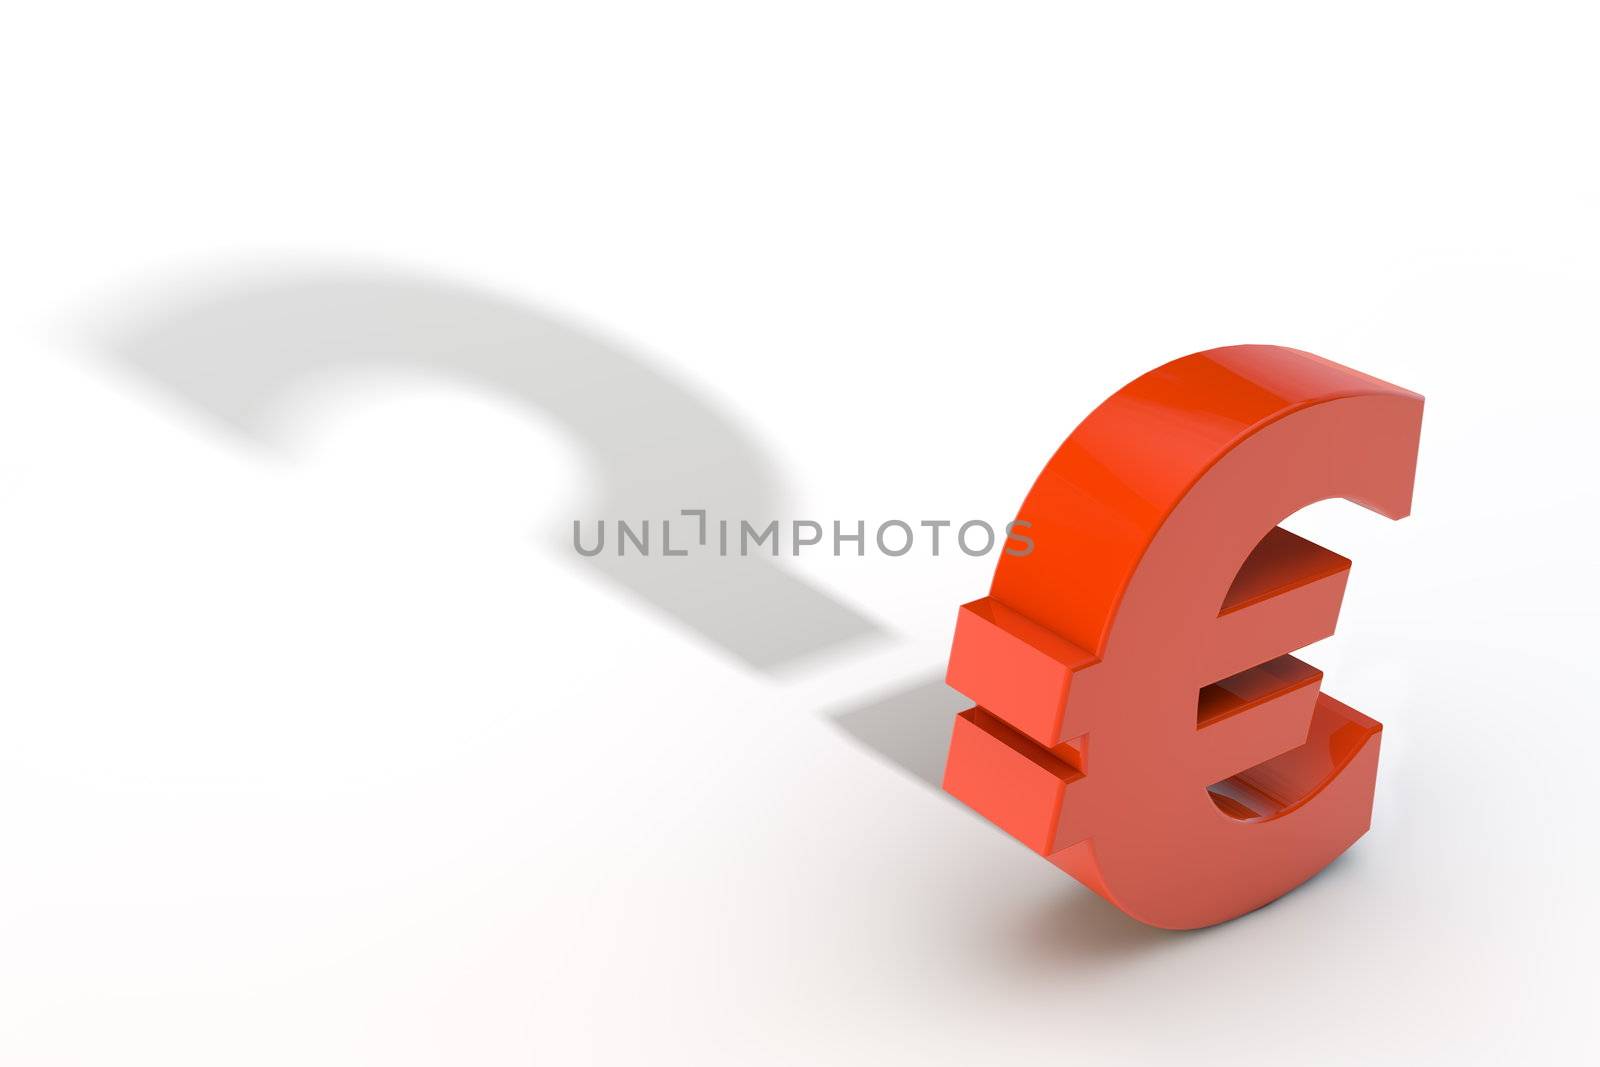 shiny red Euro currency symbol casts a question mark shadow